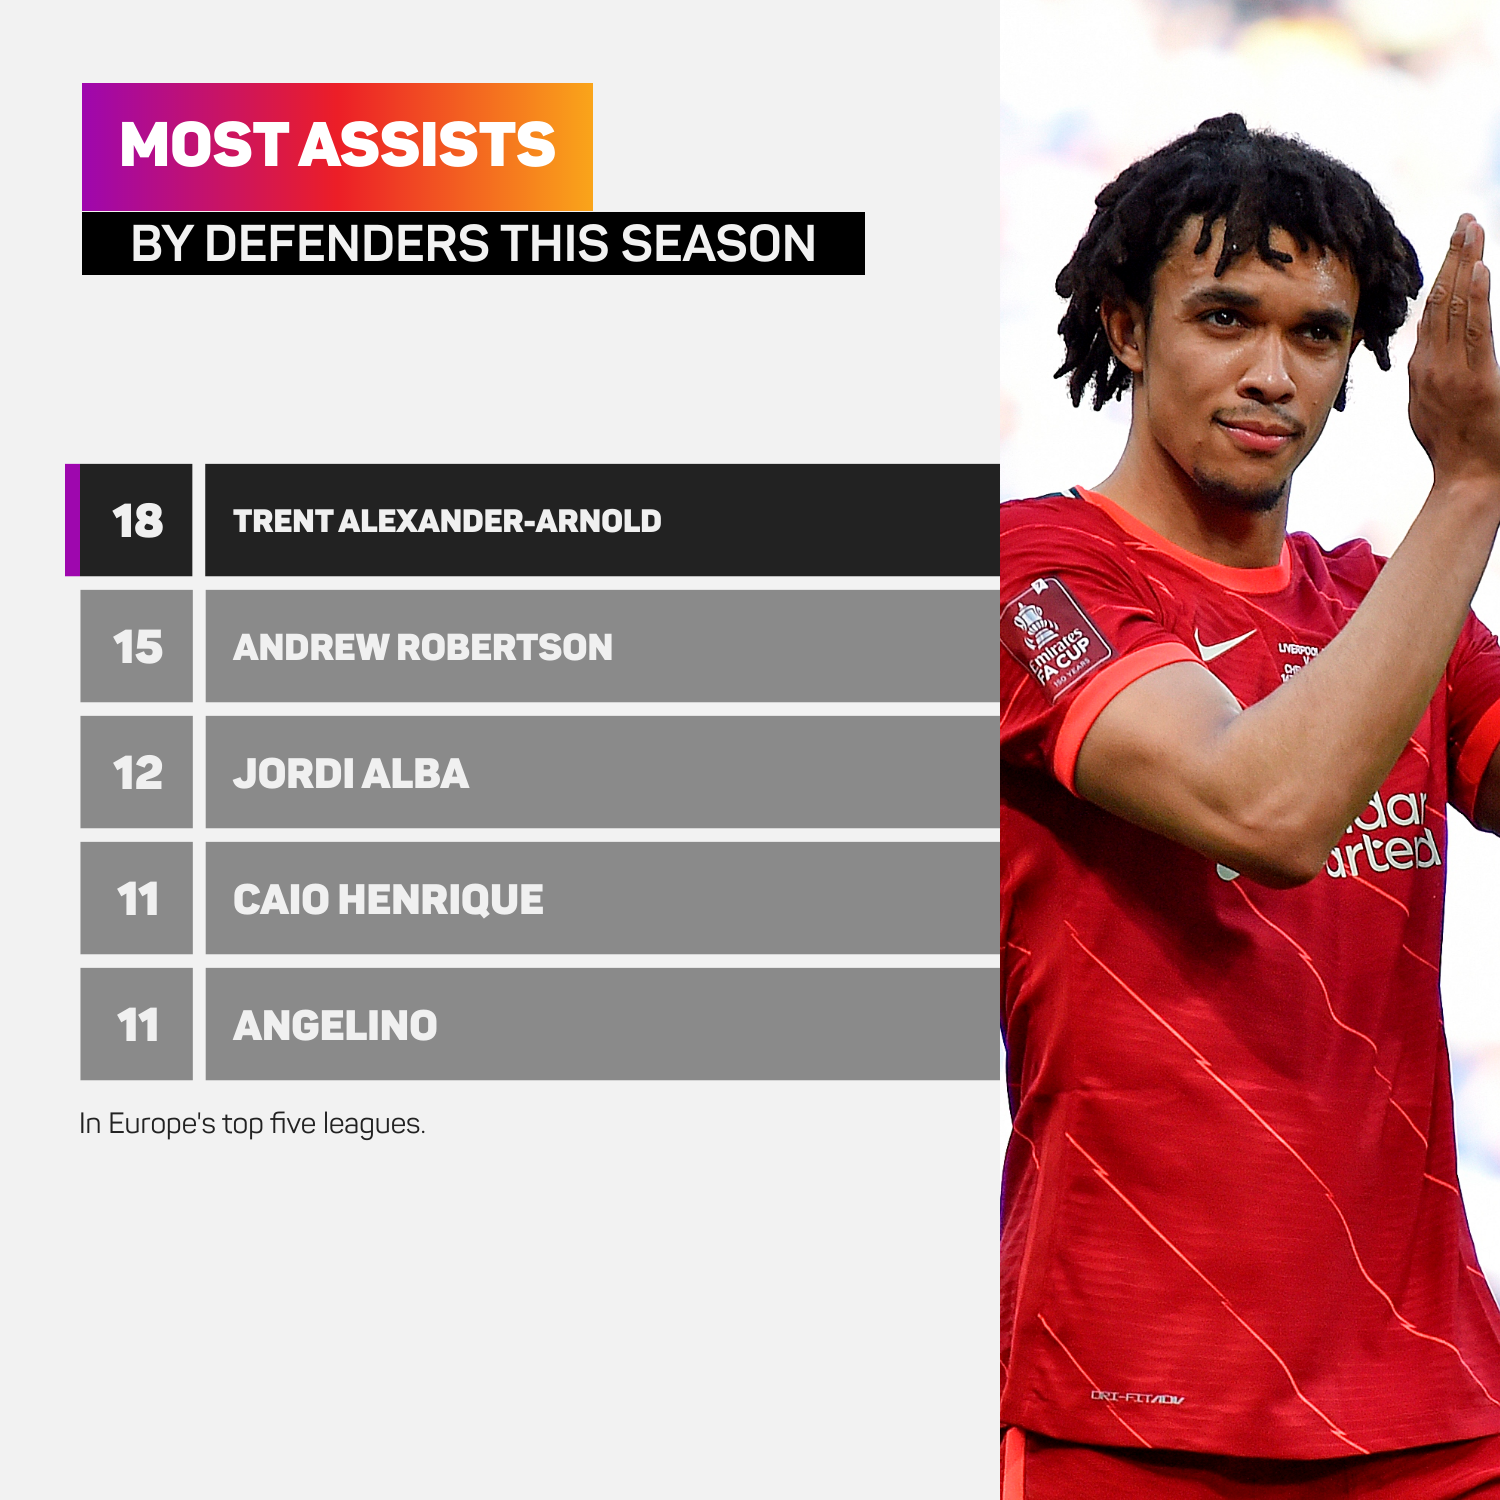 Trent Alexander-Arnold leads the way in Europe among defenders this season